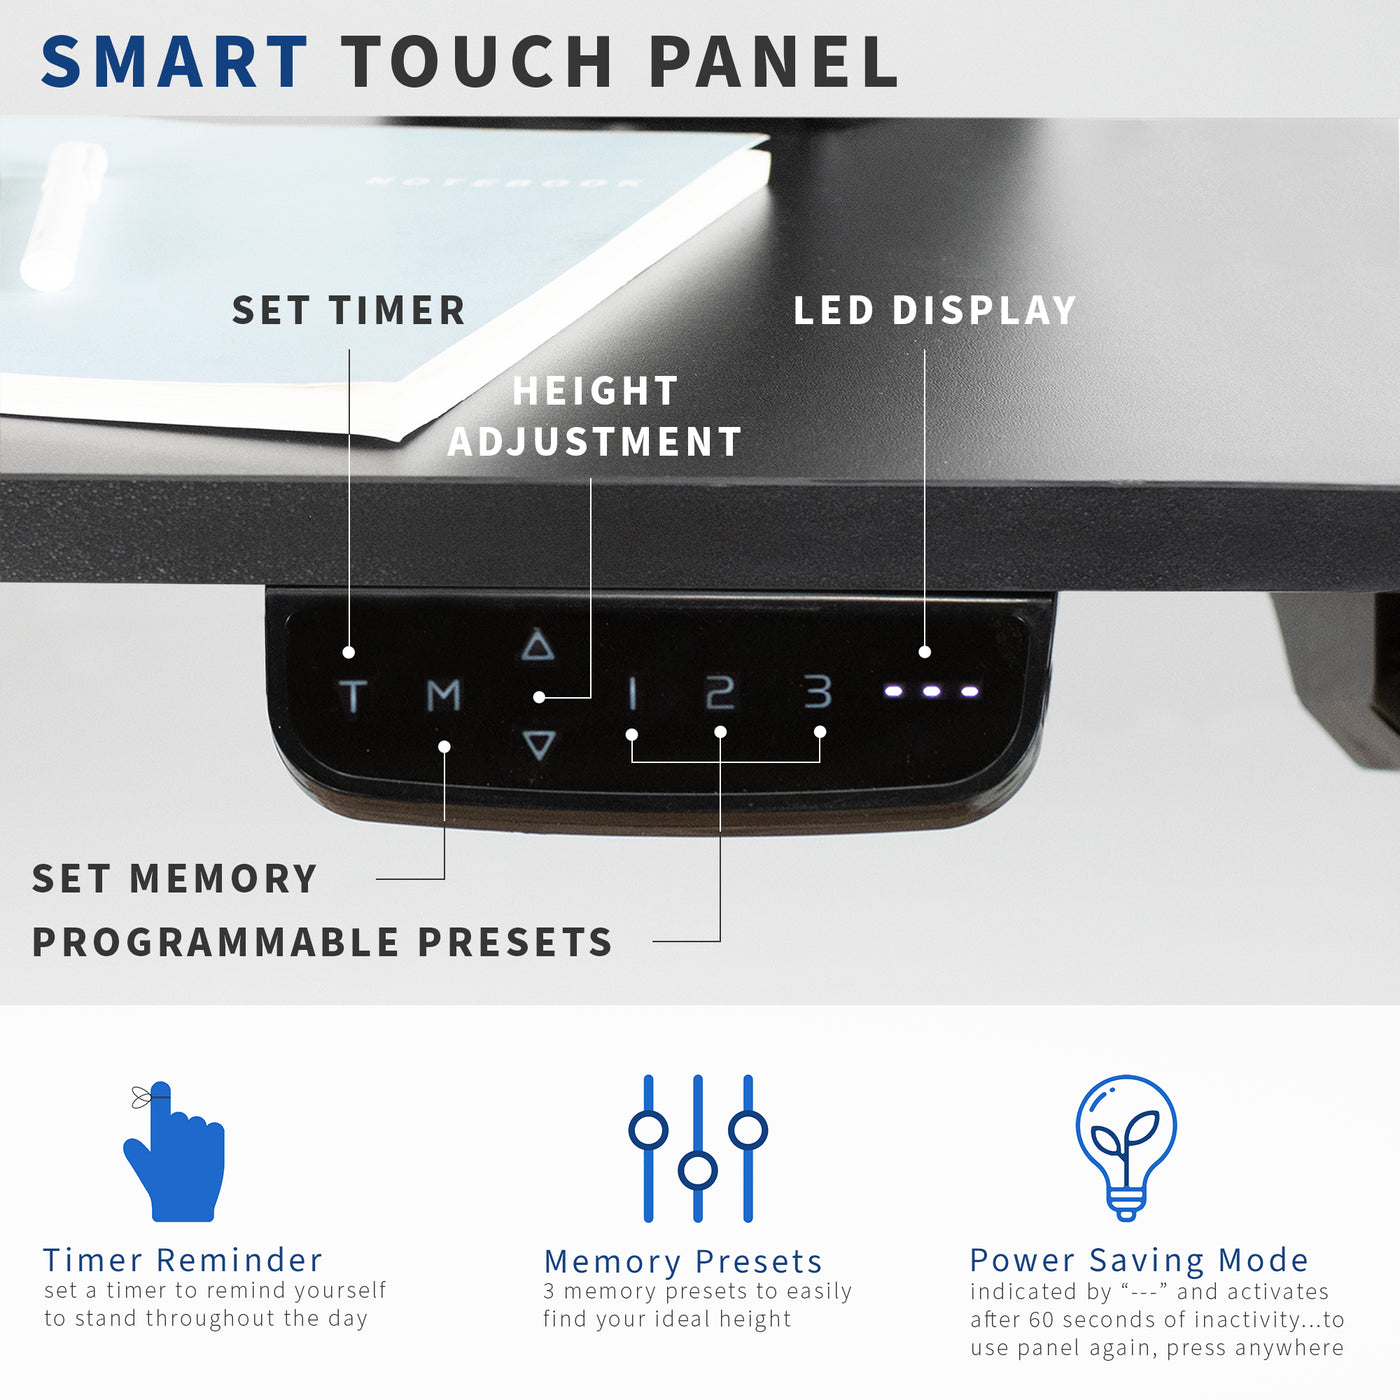 Smart touch panel with presets, timer, and a power-saving mode.